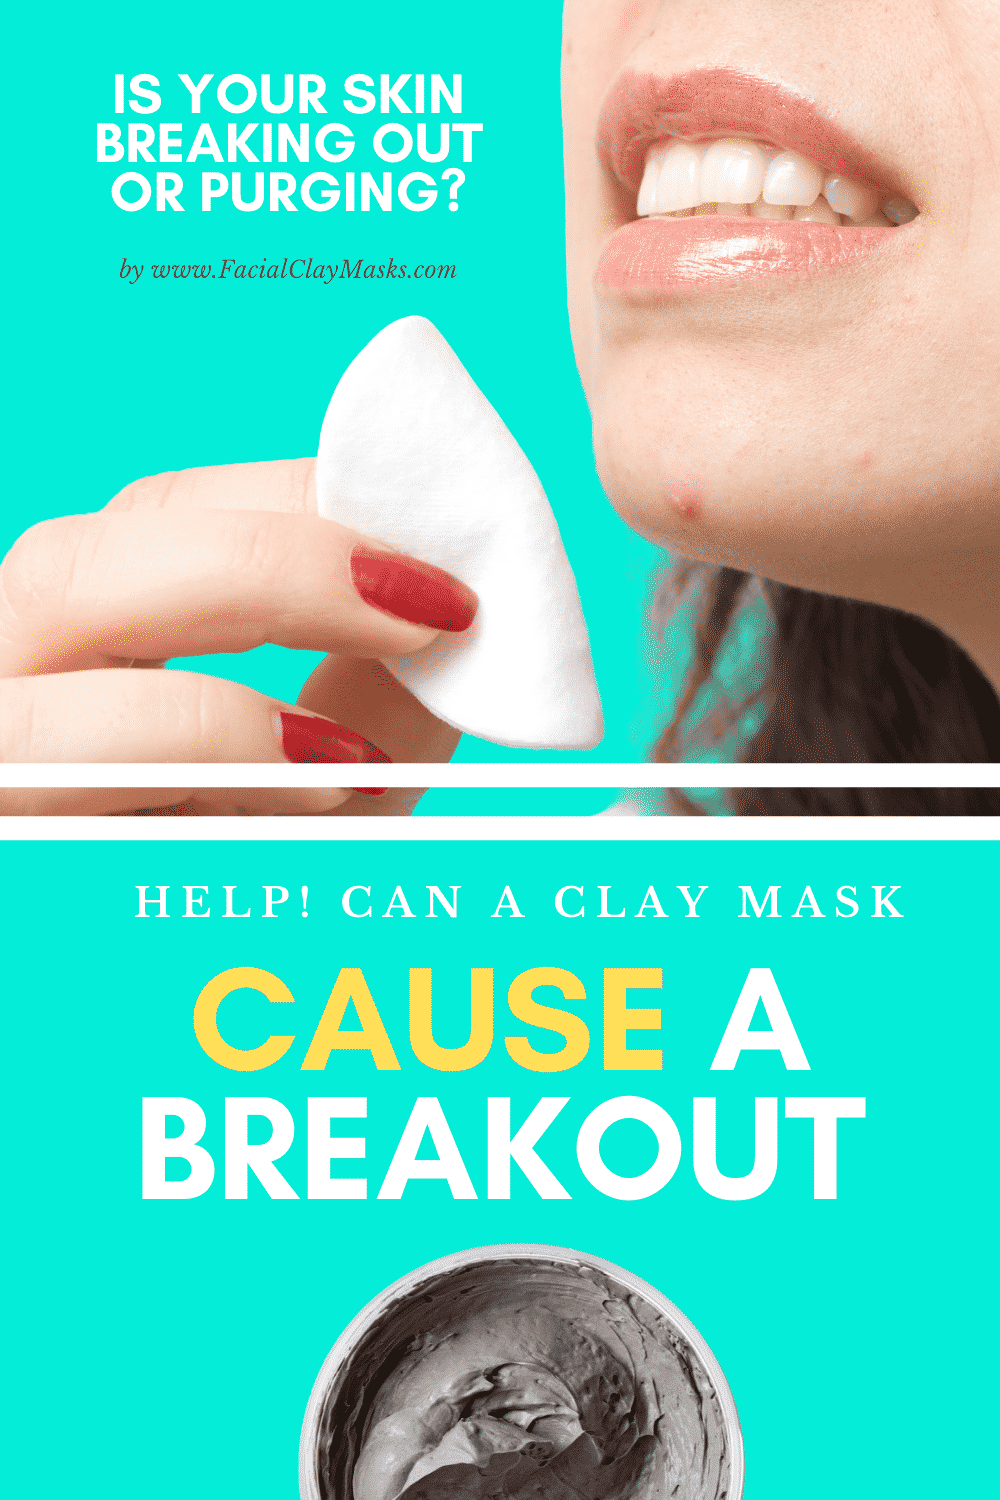 Can a clay mask make me breakout? 1